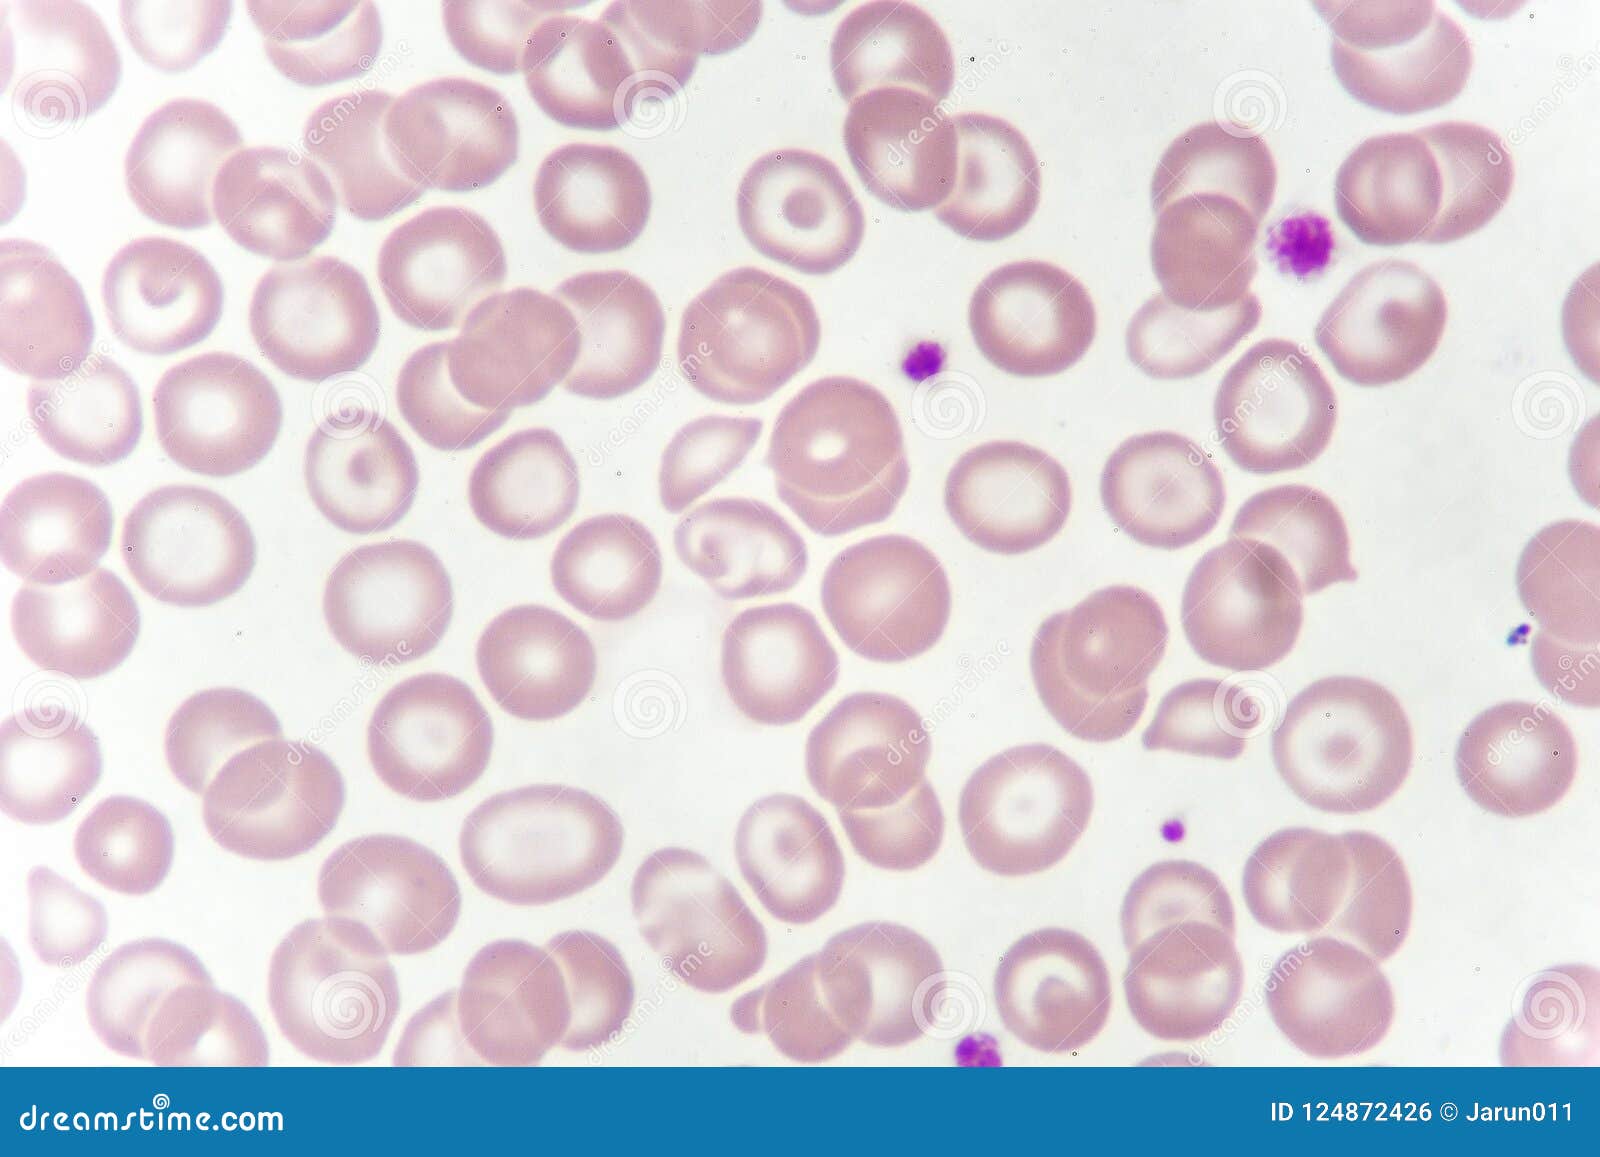 abnormal red blood cells from anemia patient